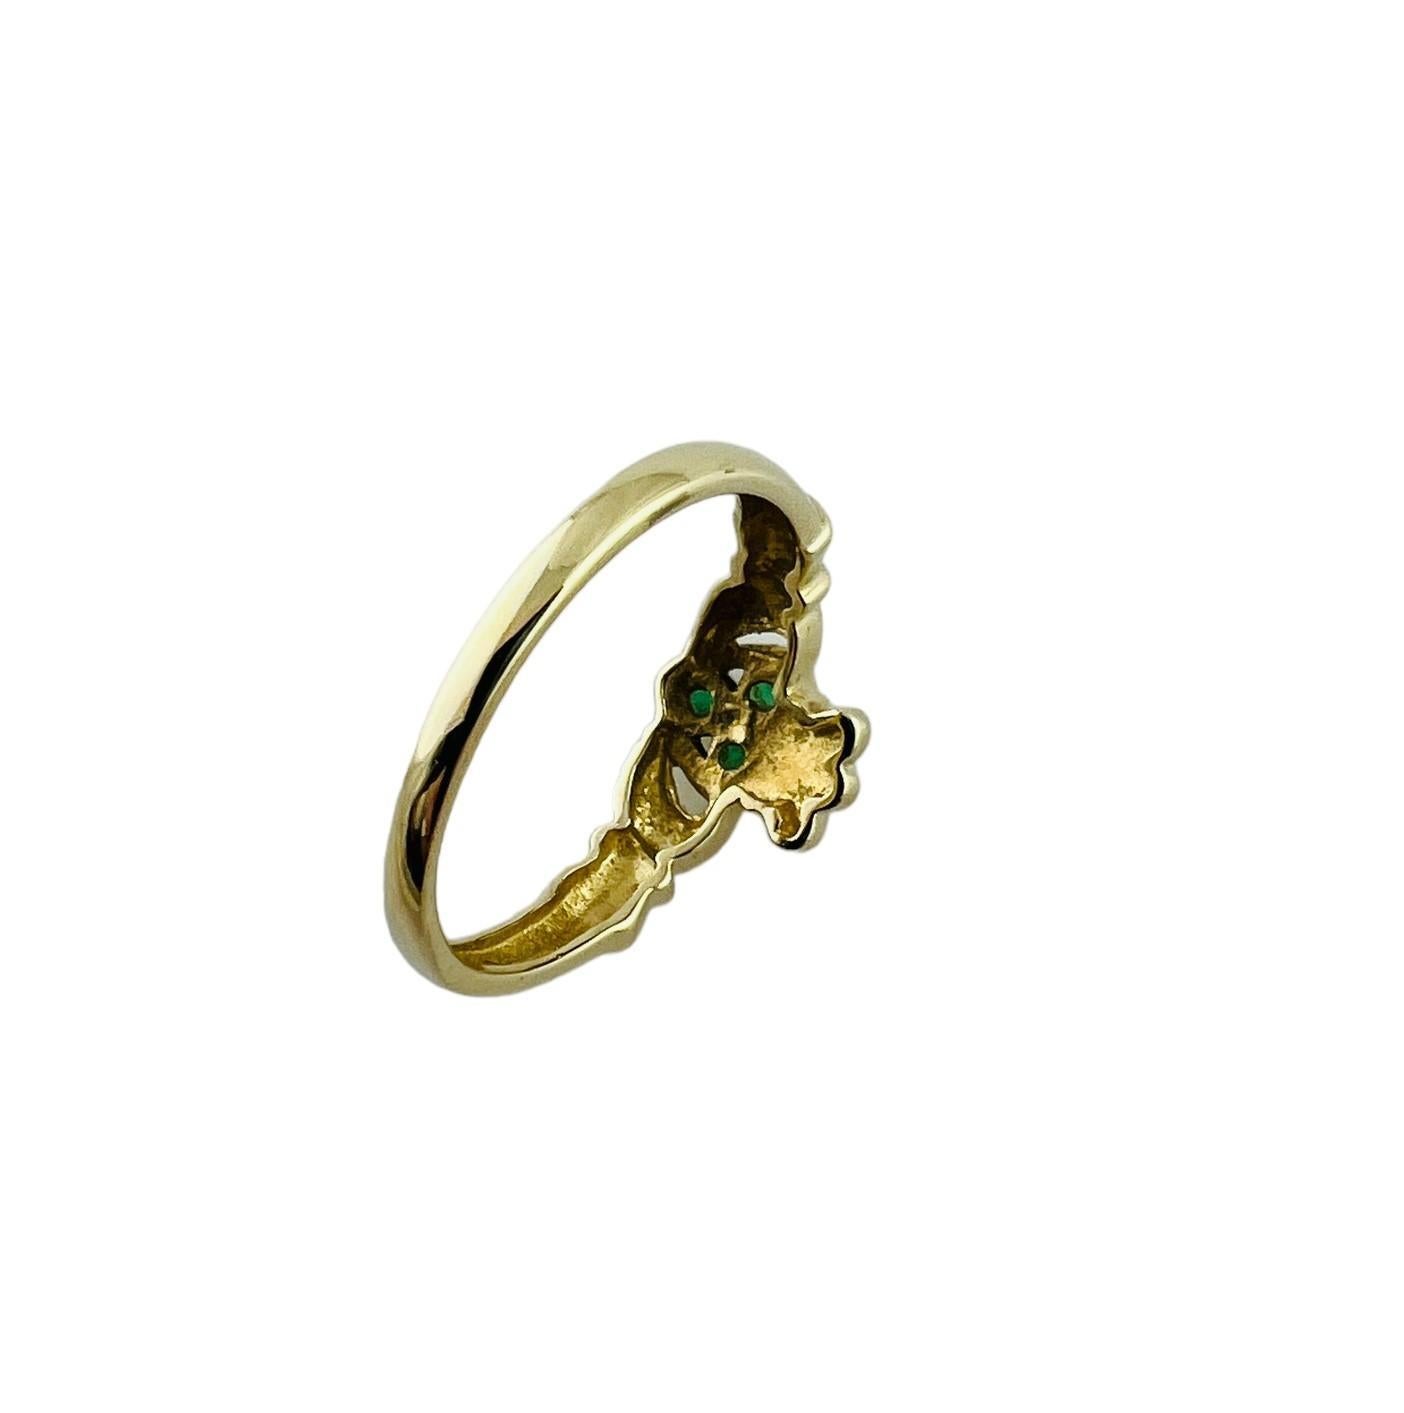 14K Yellow Gold Natural Emerald Claddagh Ring

This beautiful ring is set in 14K yellow gold. 

The claddagh ring has 3 round natural emeralds set in the heart.

Size 8

2.0 mm shank

Front of ring is 19.6 x 9.8 x 3.7 mm

2.6 g / 1.6 dwt

Stamped